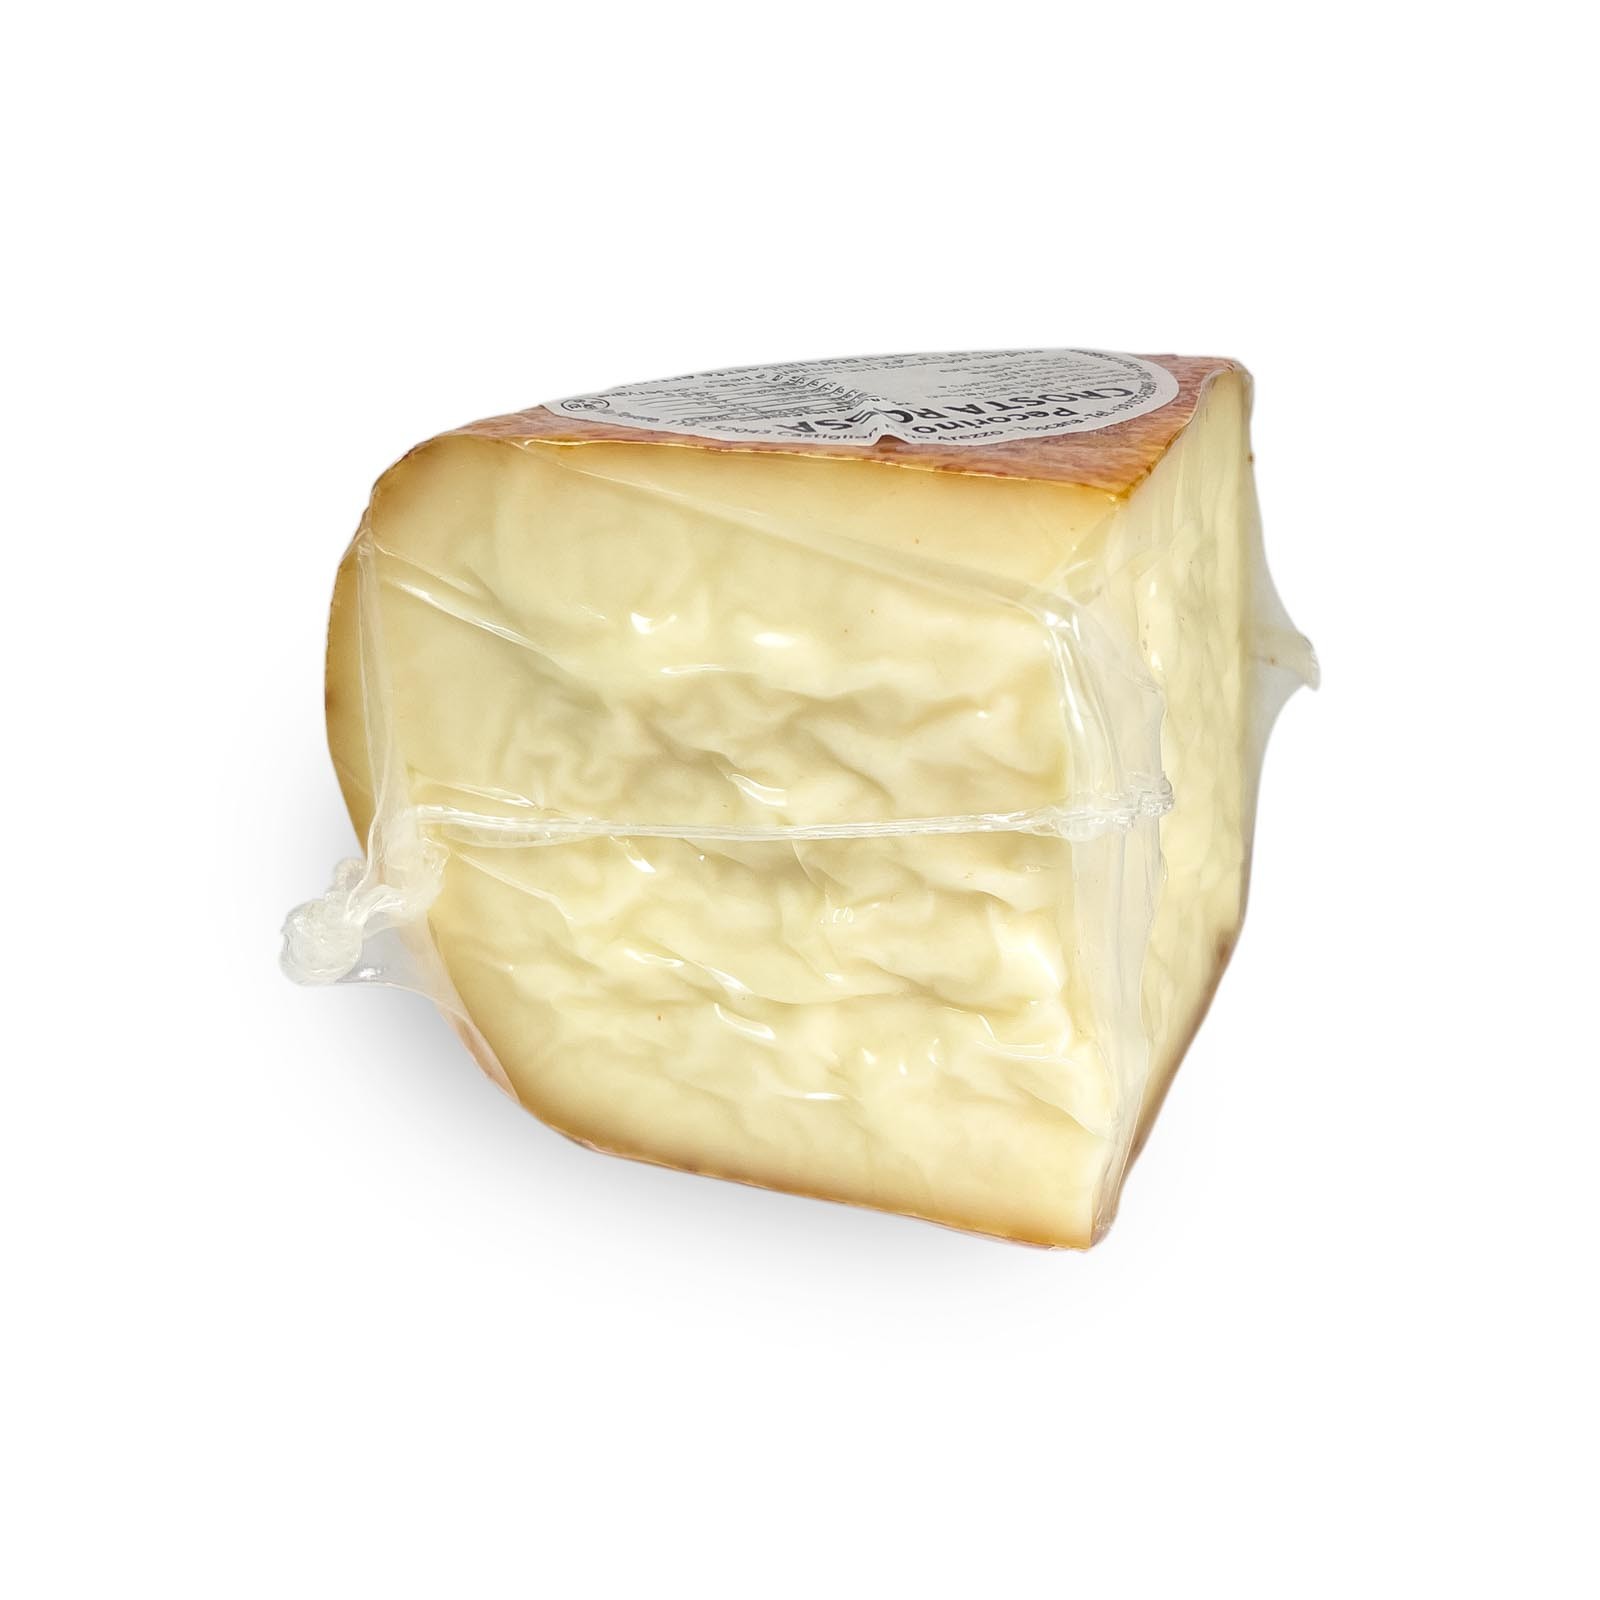 “Crosta Rossa” Semi-Aged Pecorino is a cheese made in Italy using high quality ingredients, produced through an artisanal process that includes an aging of about sixty days. Following this period, the product is processed in crust by combining olive oil and tomato concentrate.